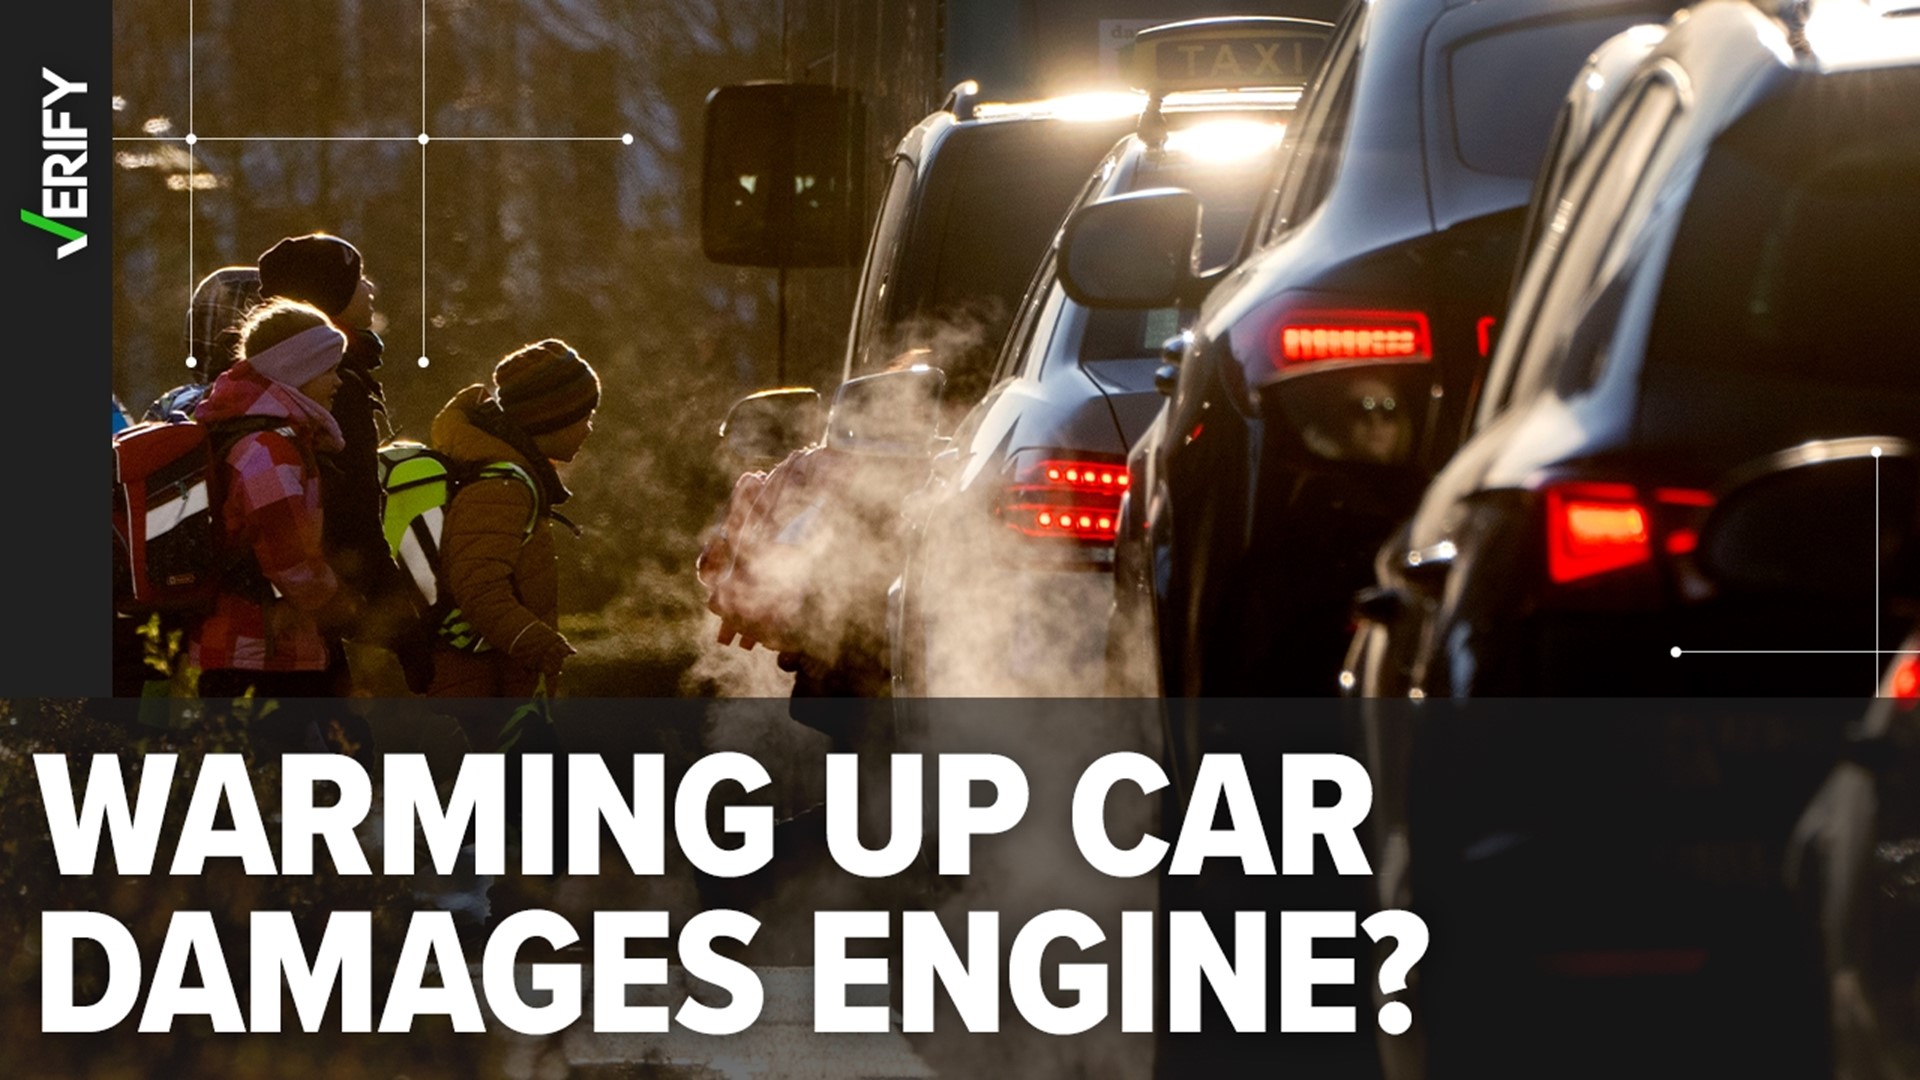 Warming up your car in cold weather can cause engine damage